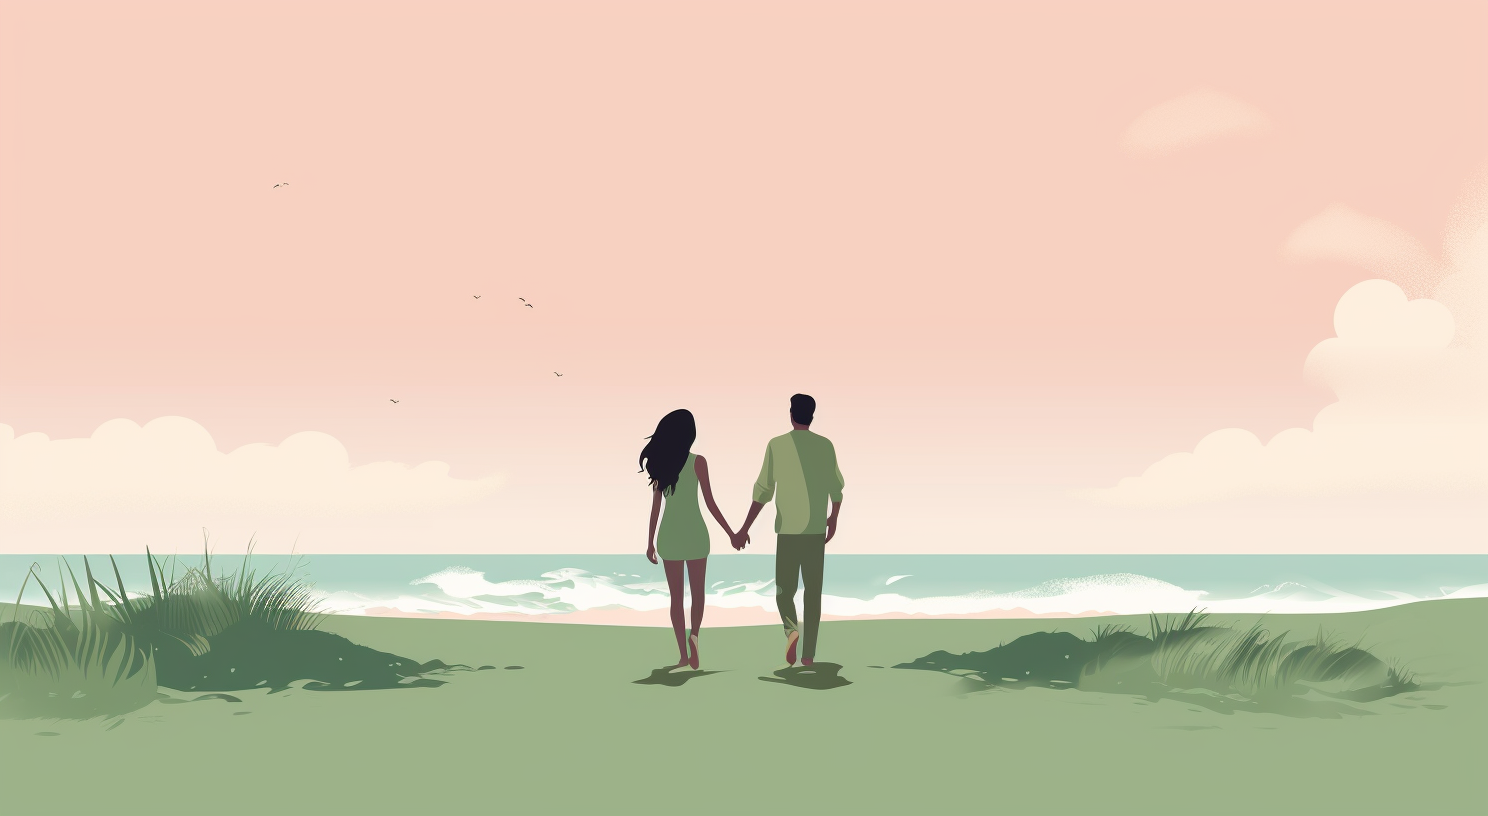 A man and woman hold hands on the beach.